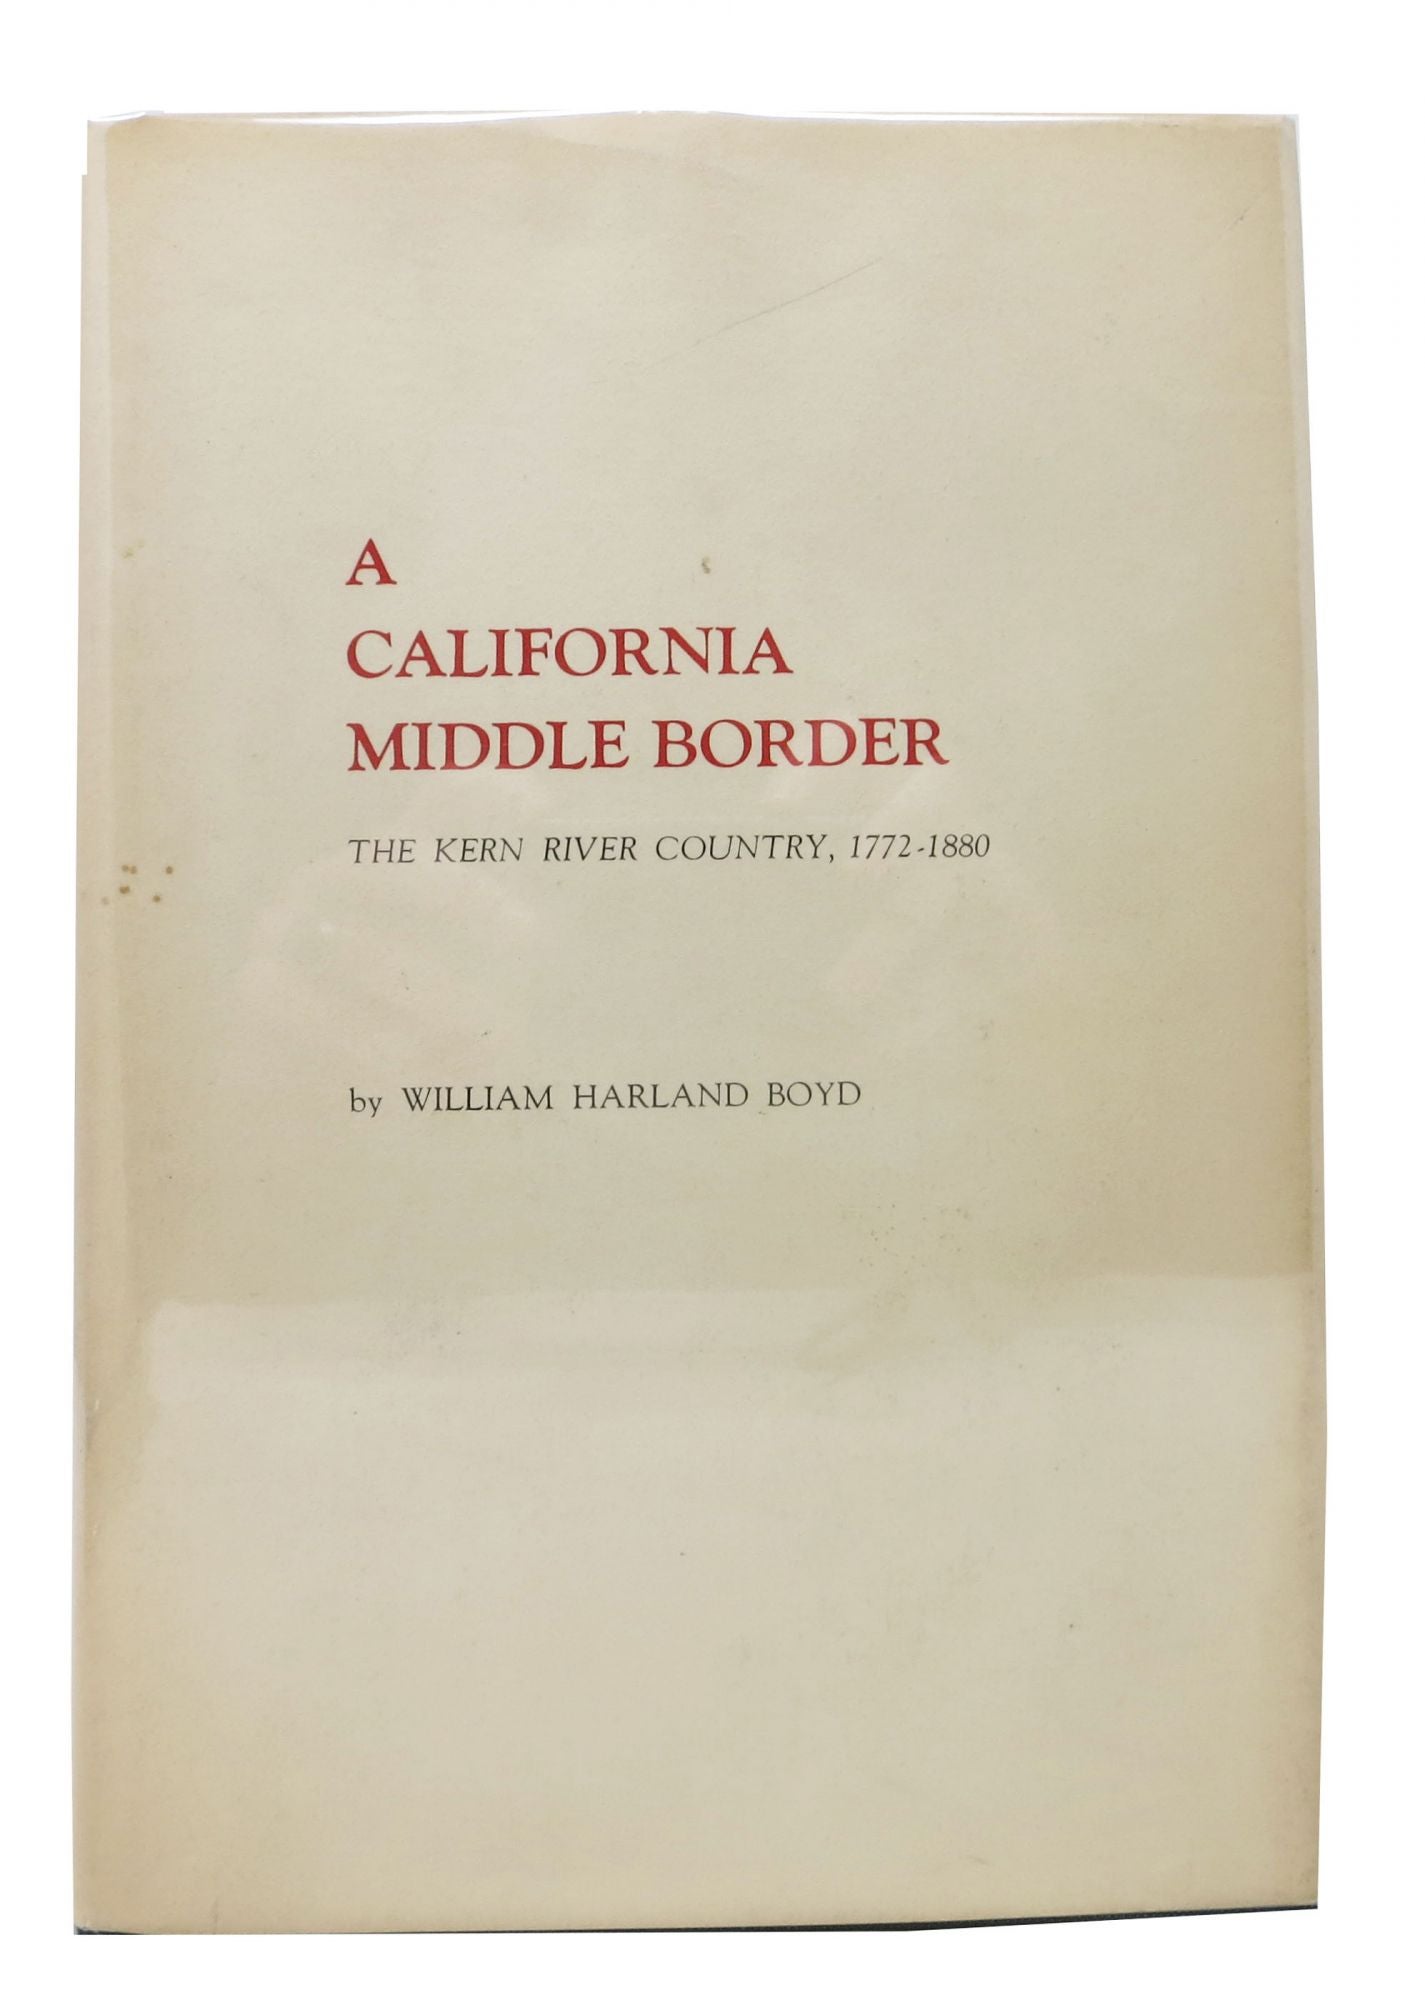 Boyd, William Harland - A CALIFORNIA MIDDLE BORDER: The Kern River County, 1772 - 1880.; Foreword by Rodman W. Paul